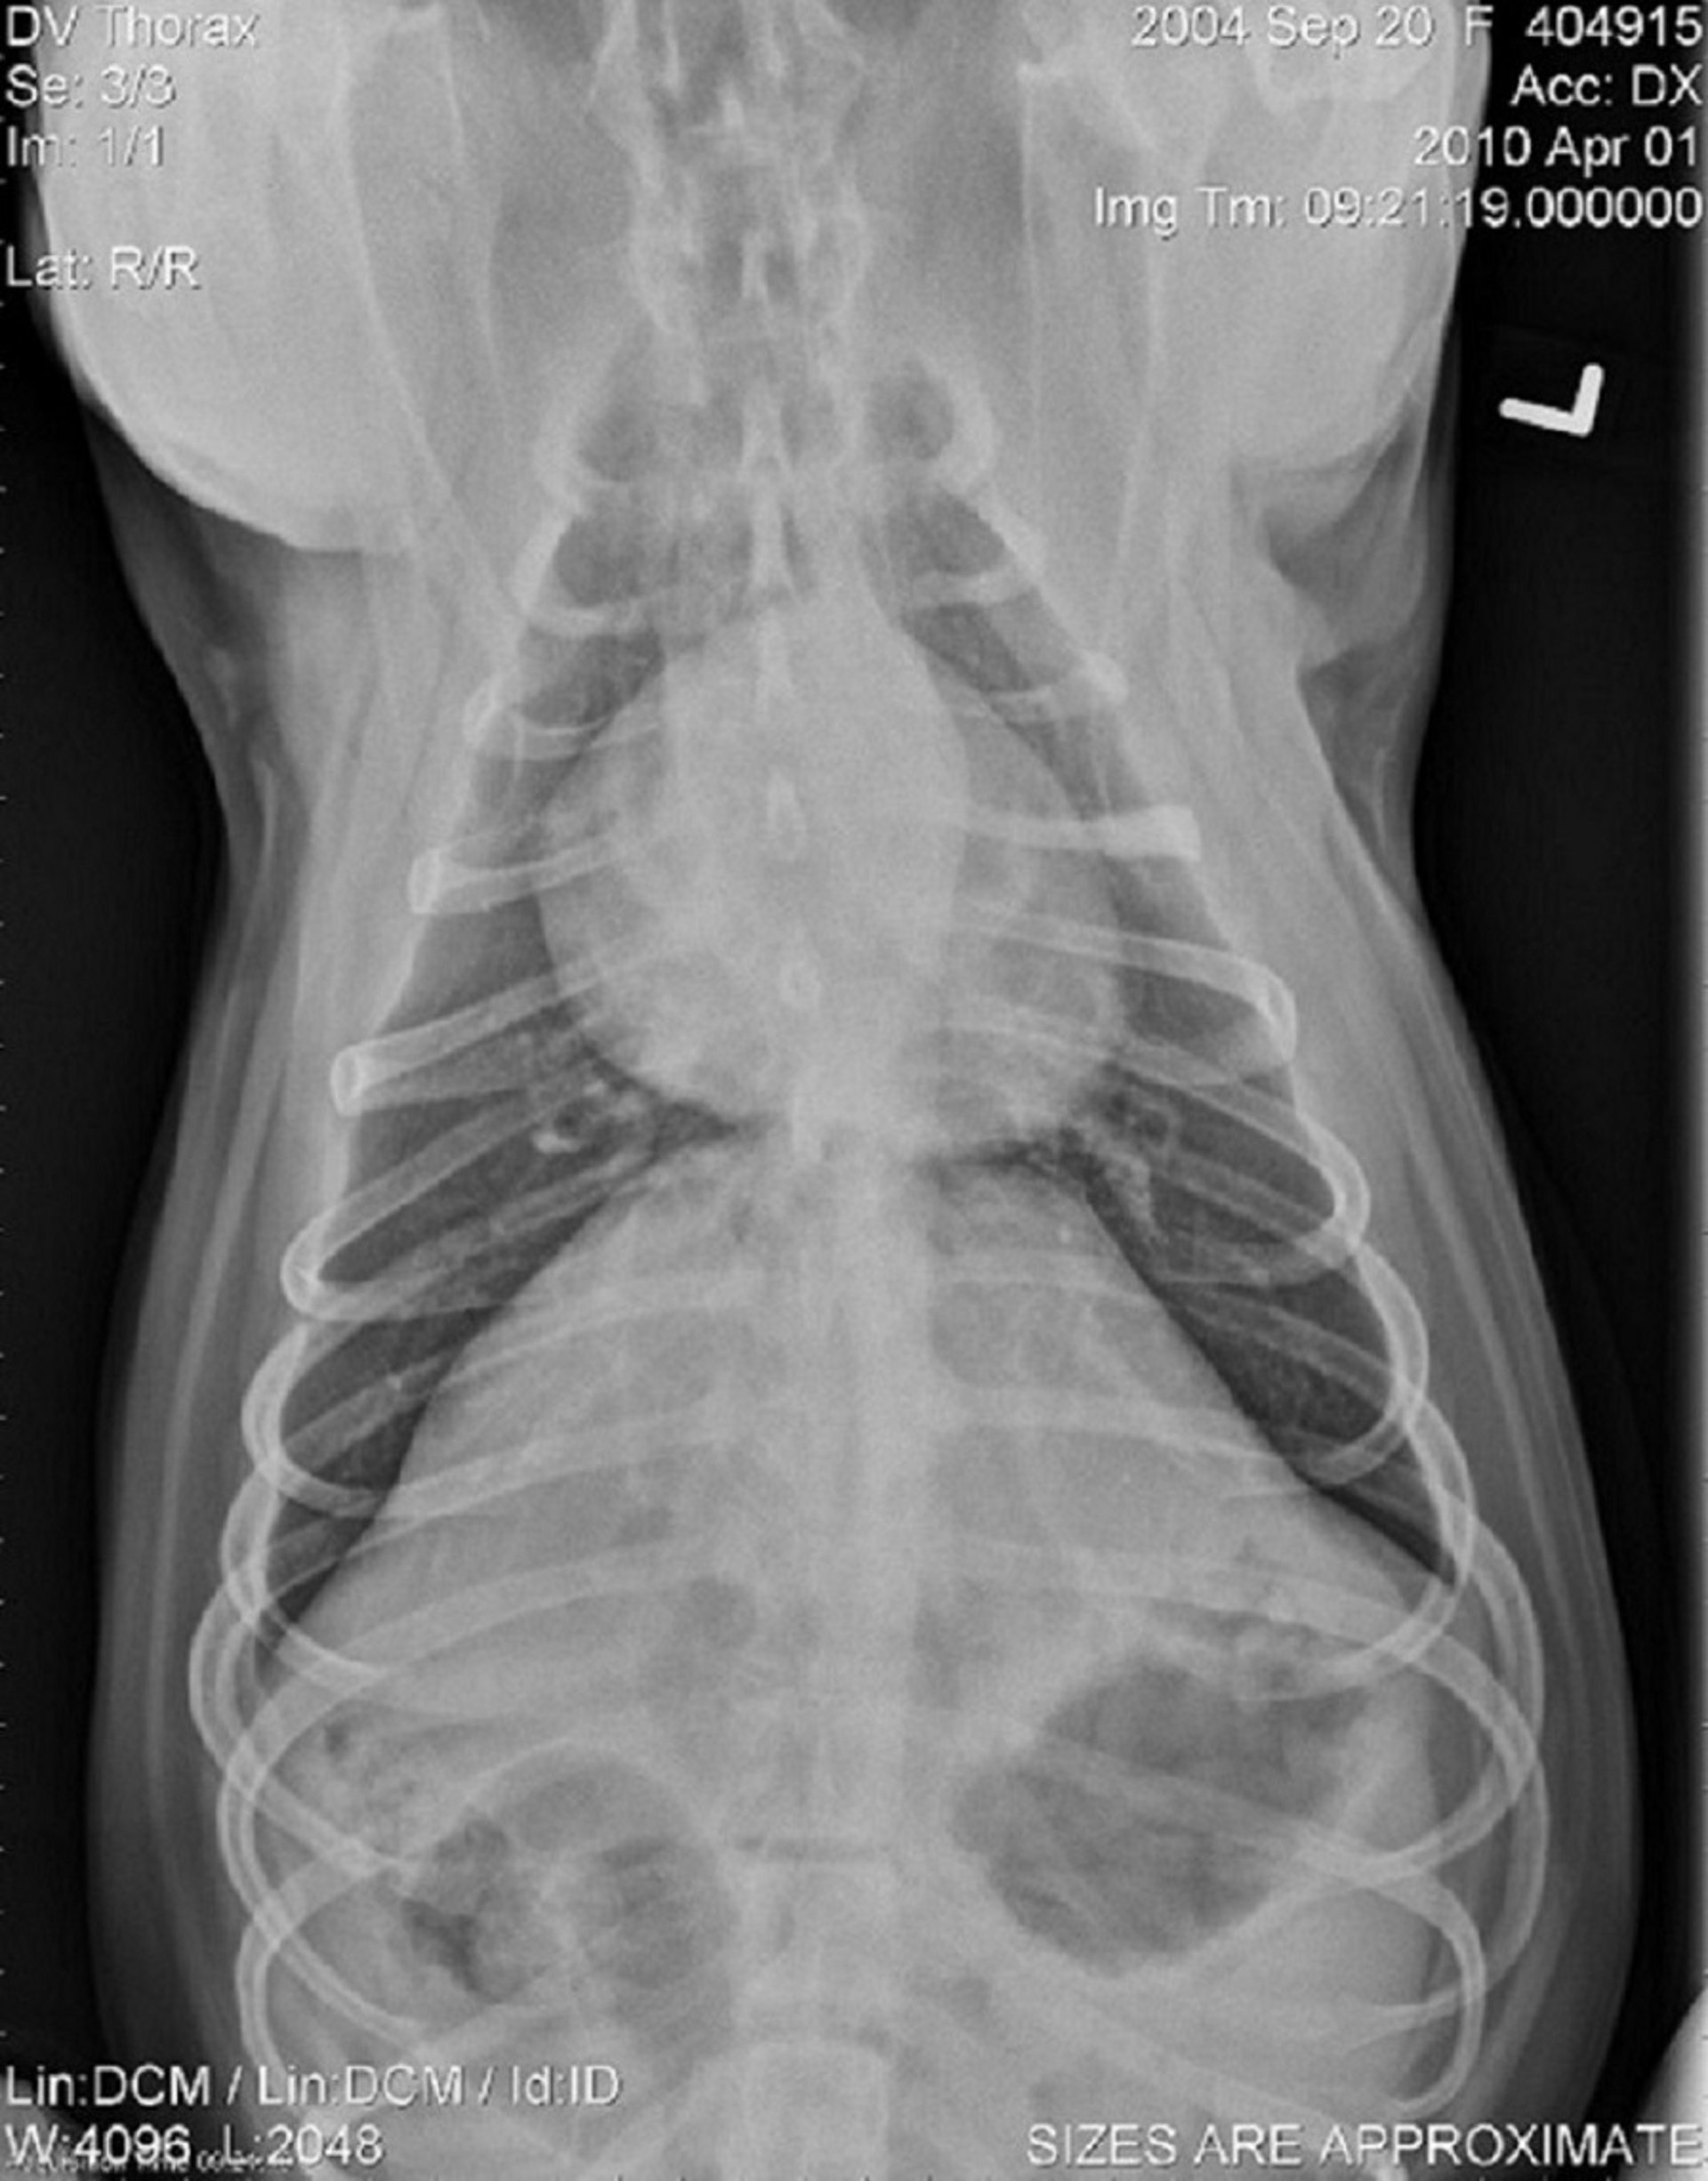 Ventrodorsal radiograph, normal dog with deep chest